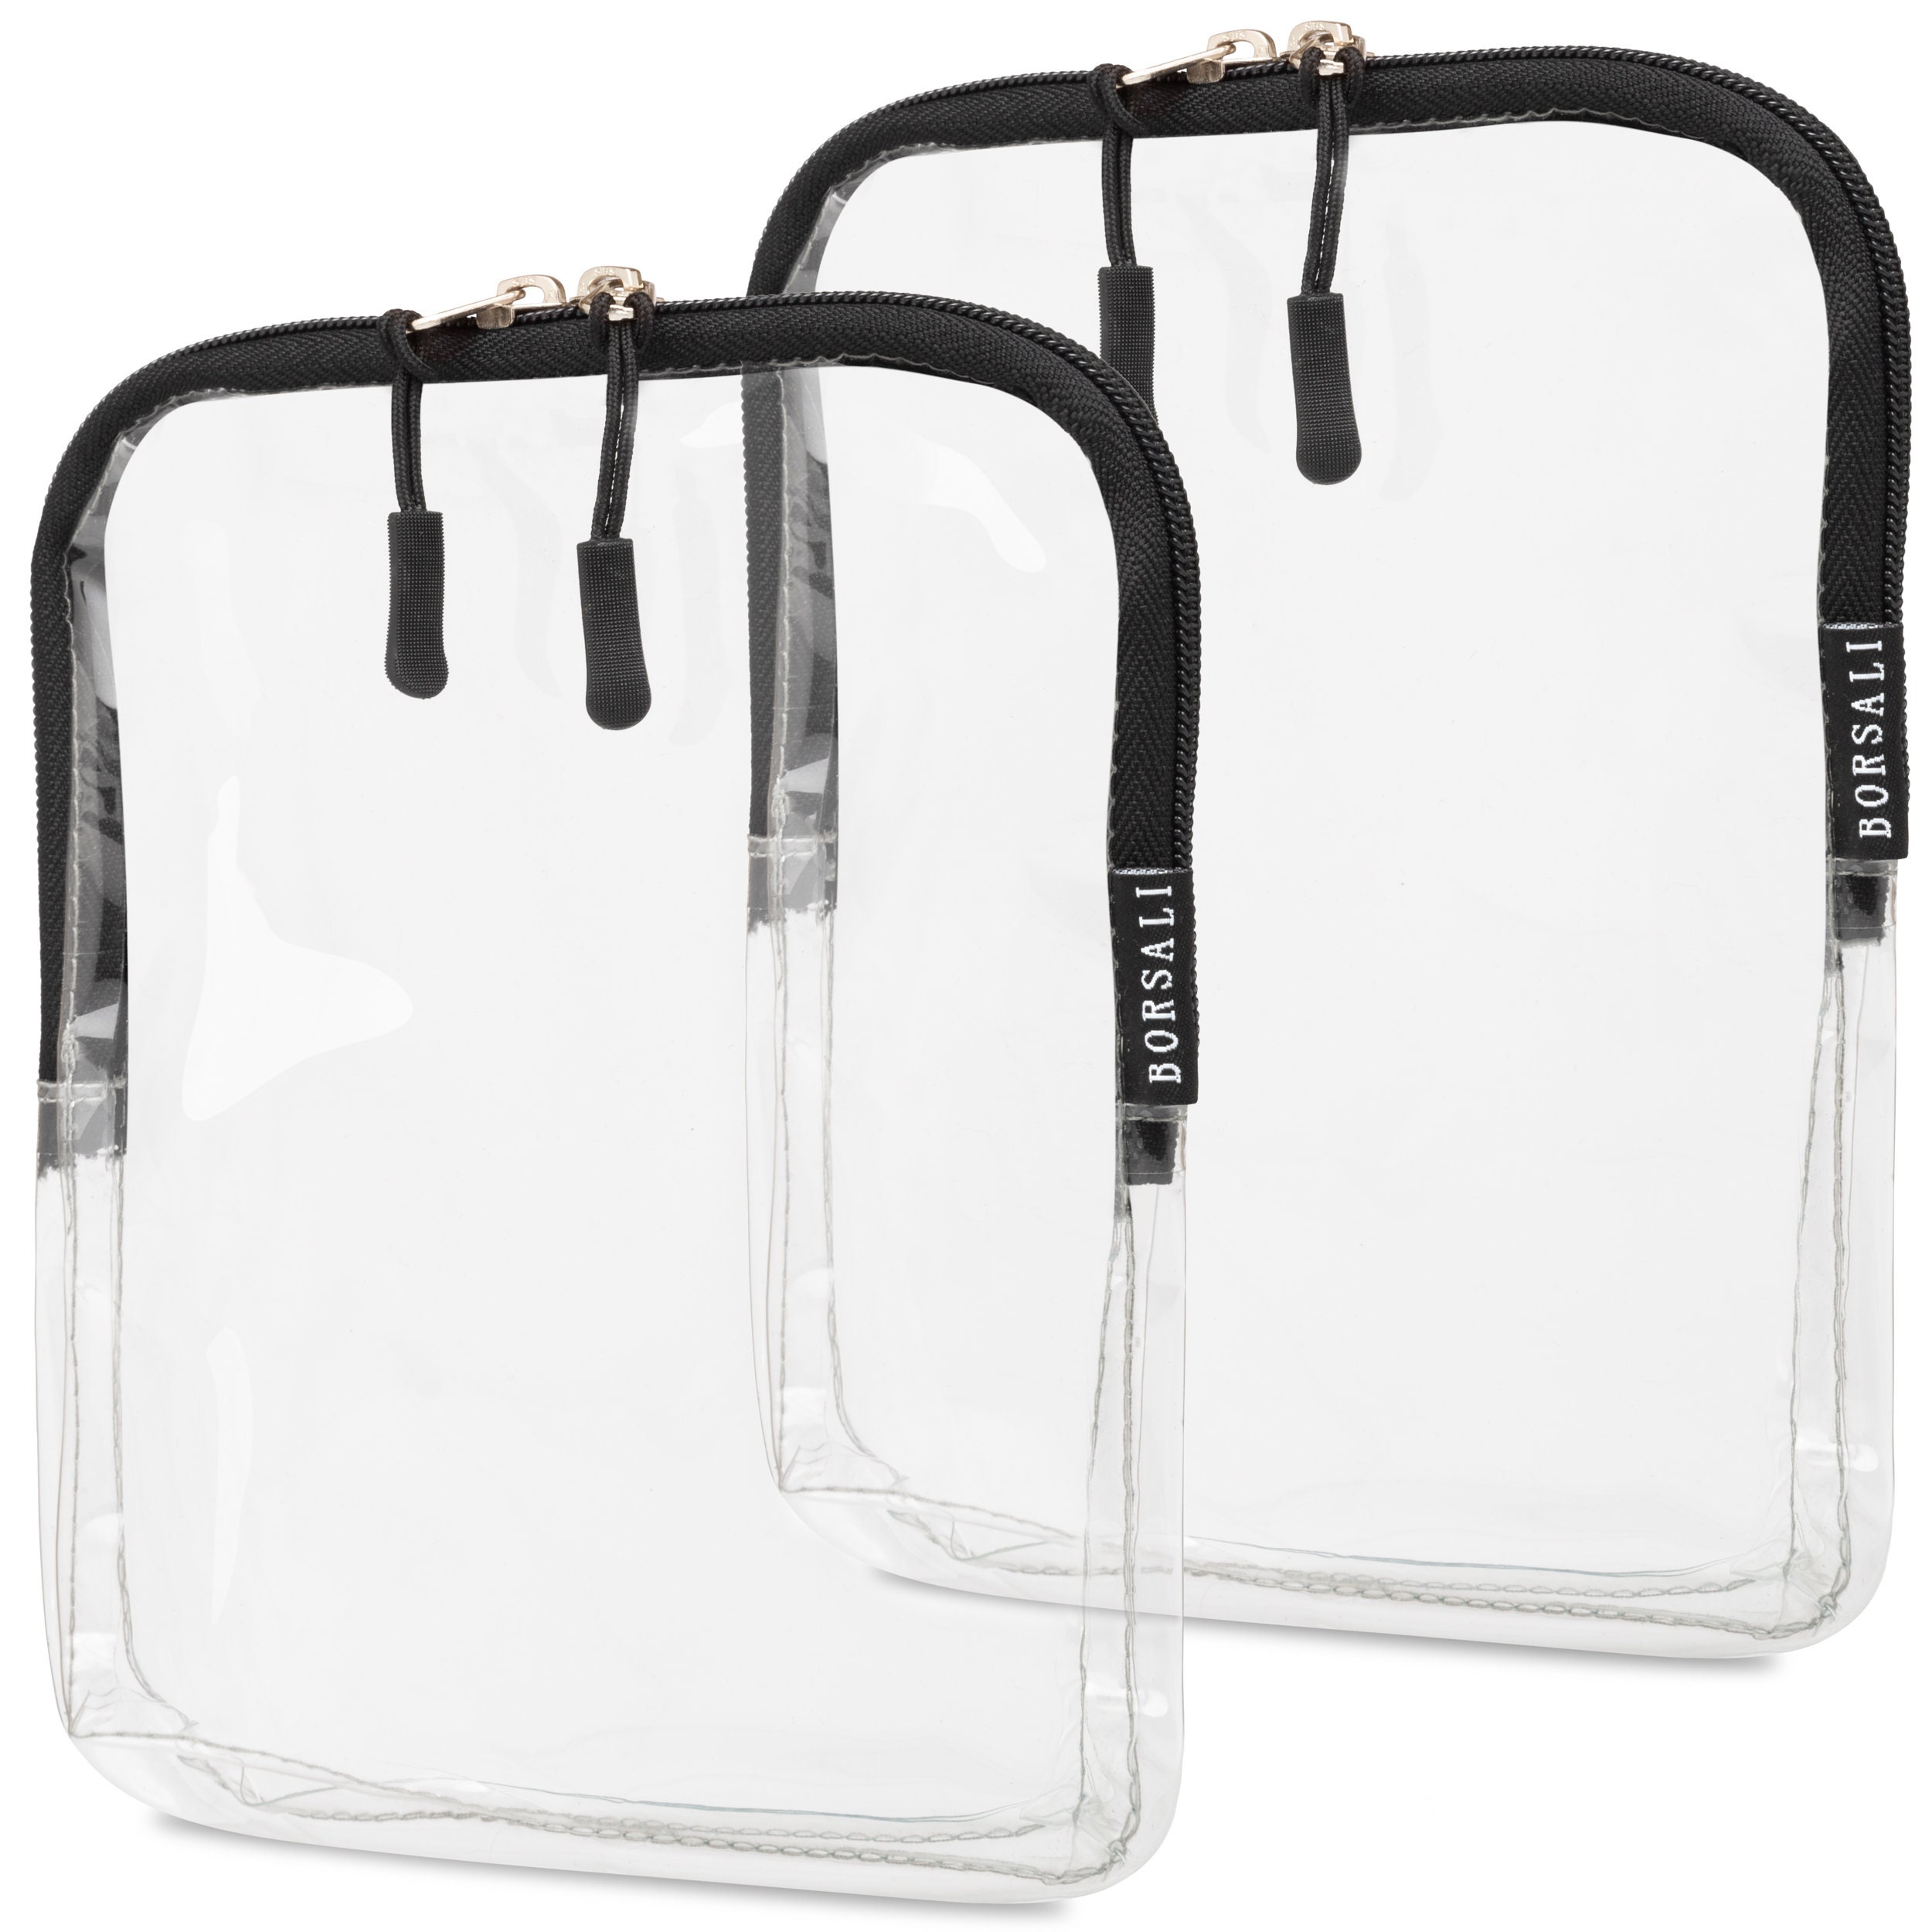 Clear Quart Size Bag for TSA Approved Toiletries, Crafts and Personal  Items. Re-useable, Zippered and Easy to Clean 